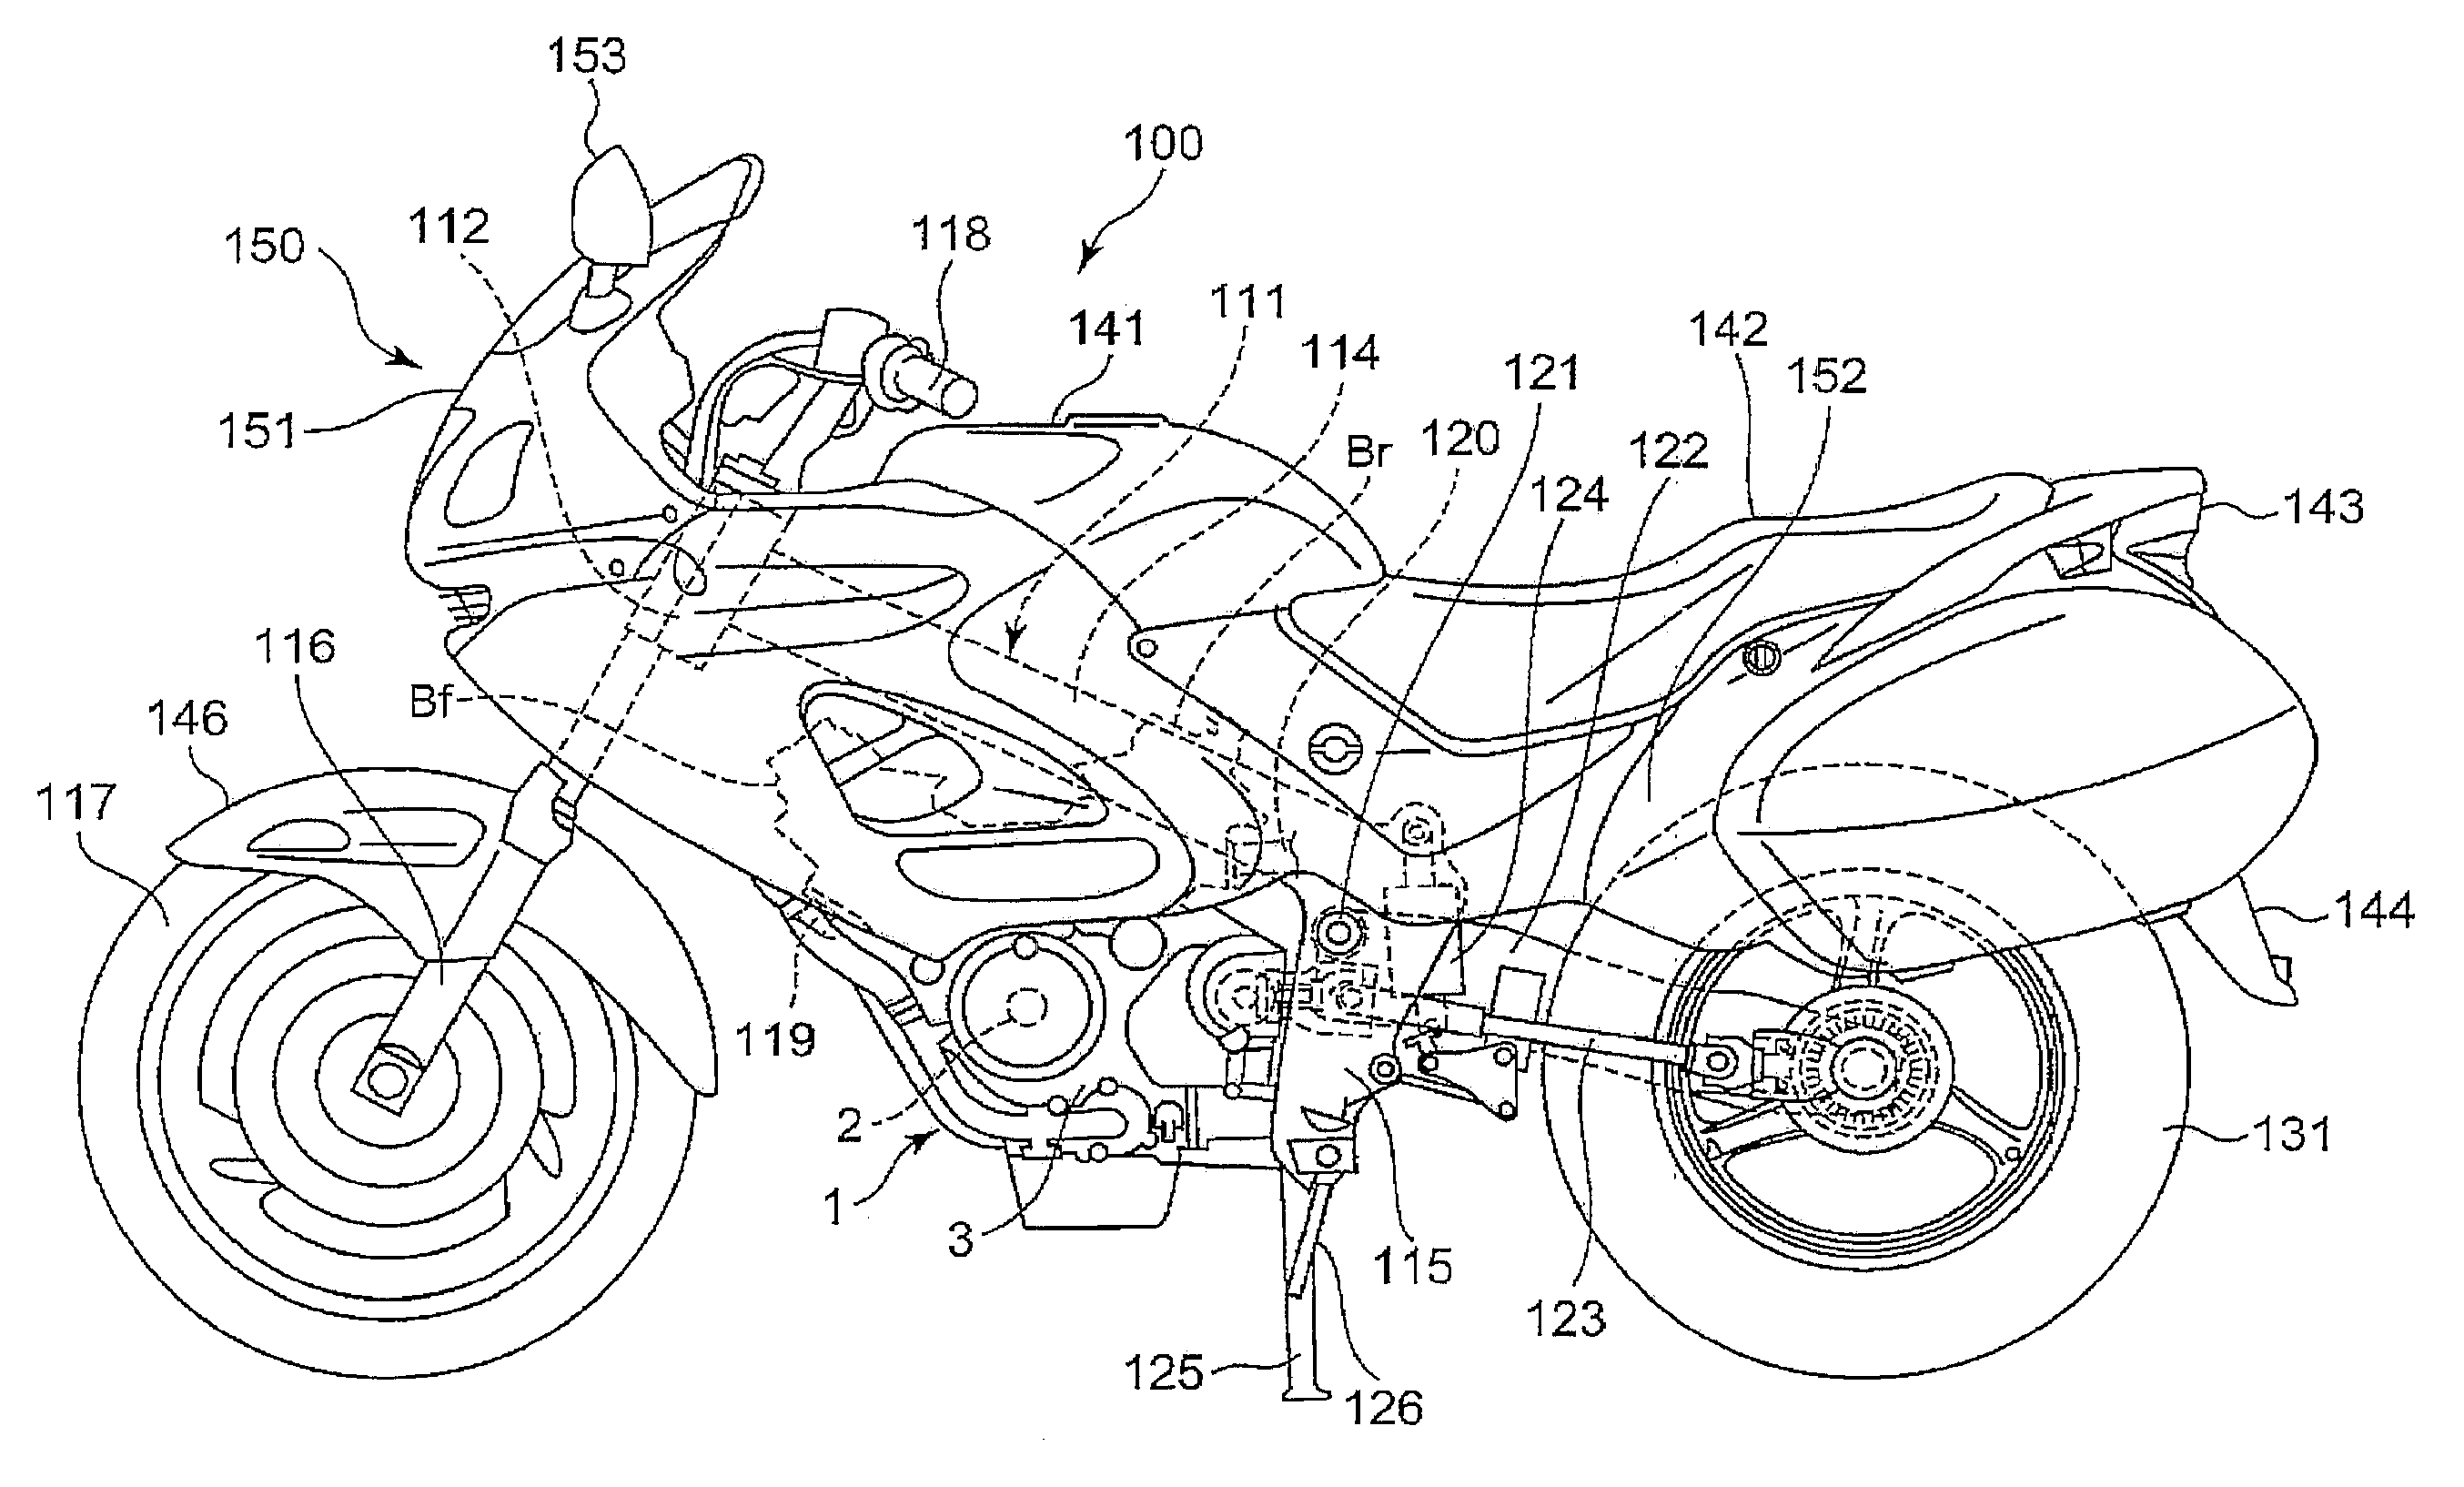 Ignition device attachment structure for internal combustion engine